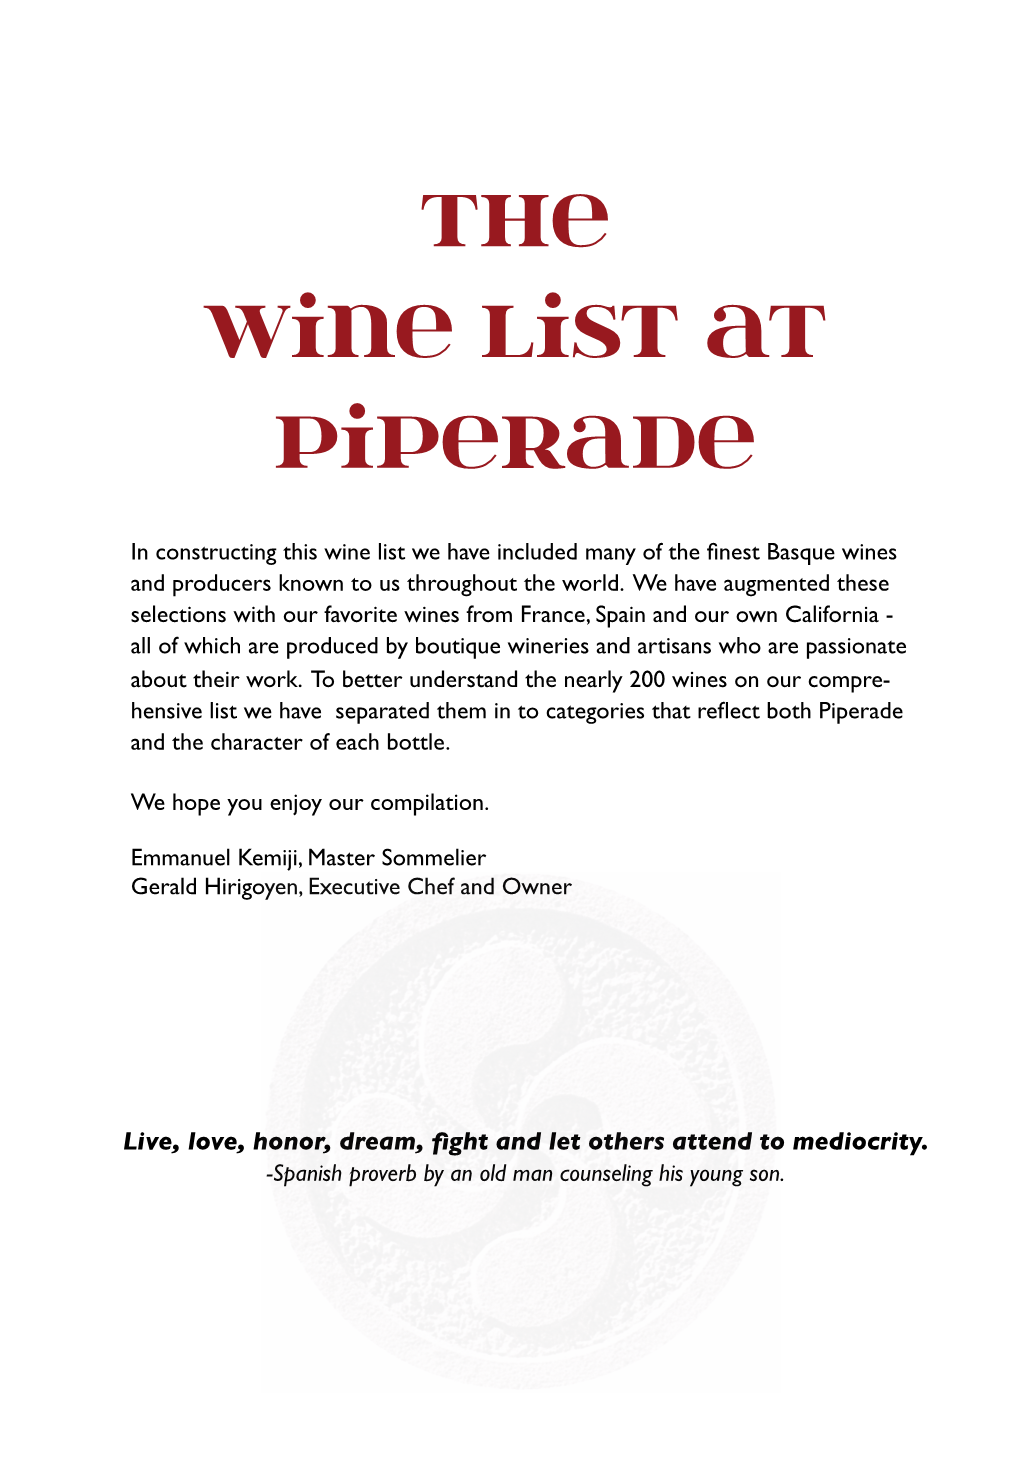 The Wine List at Piperade